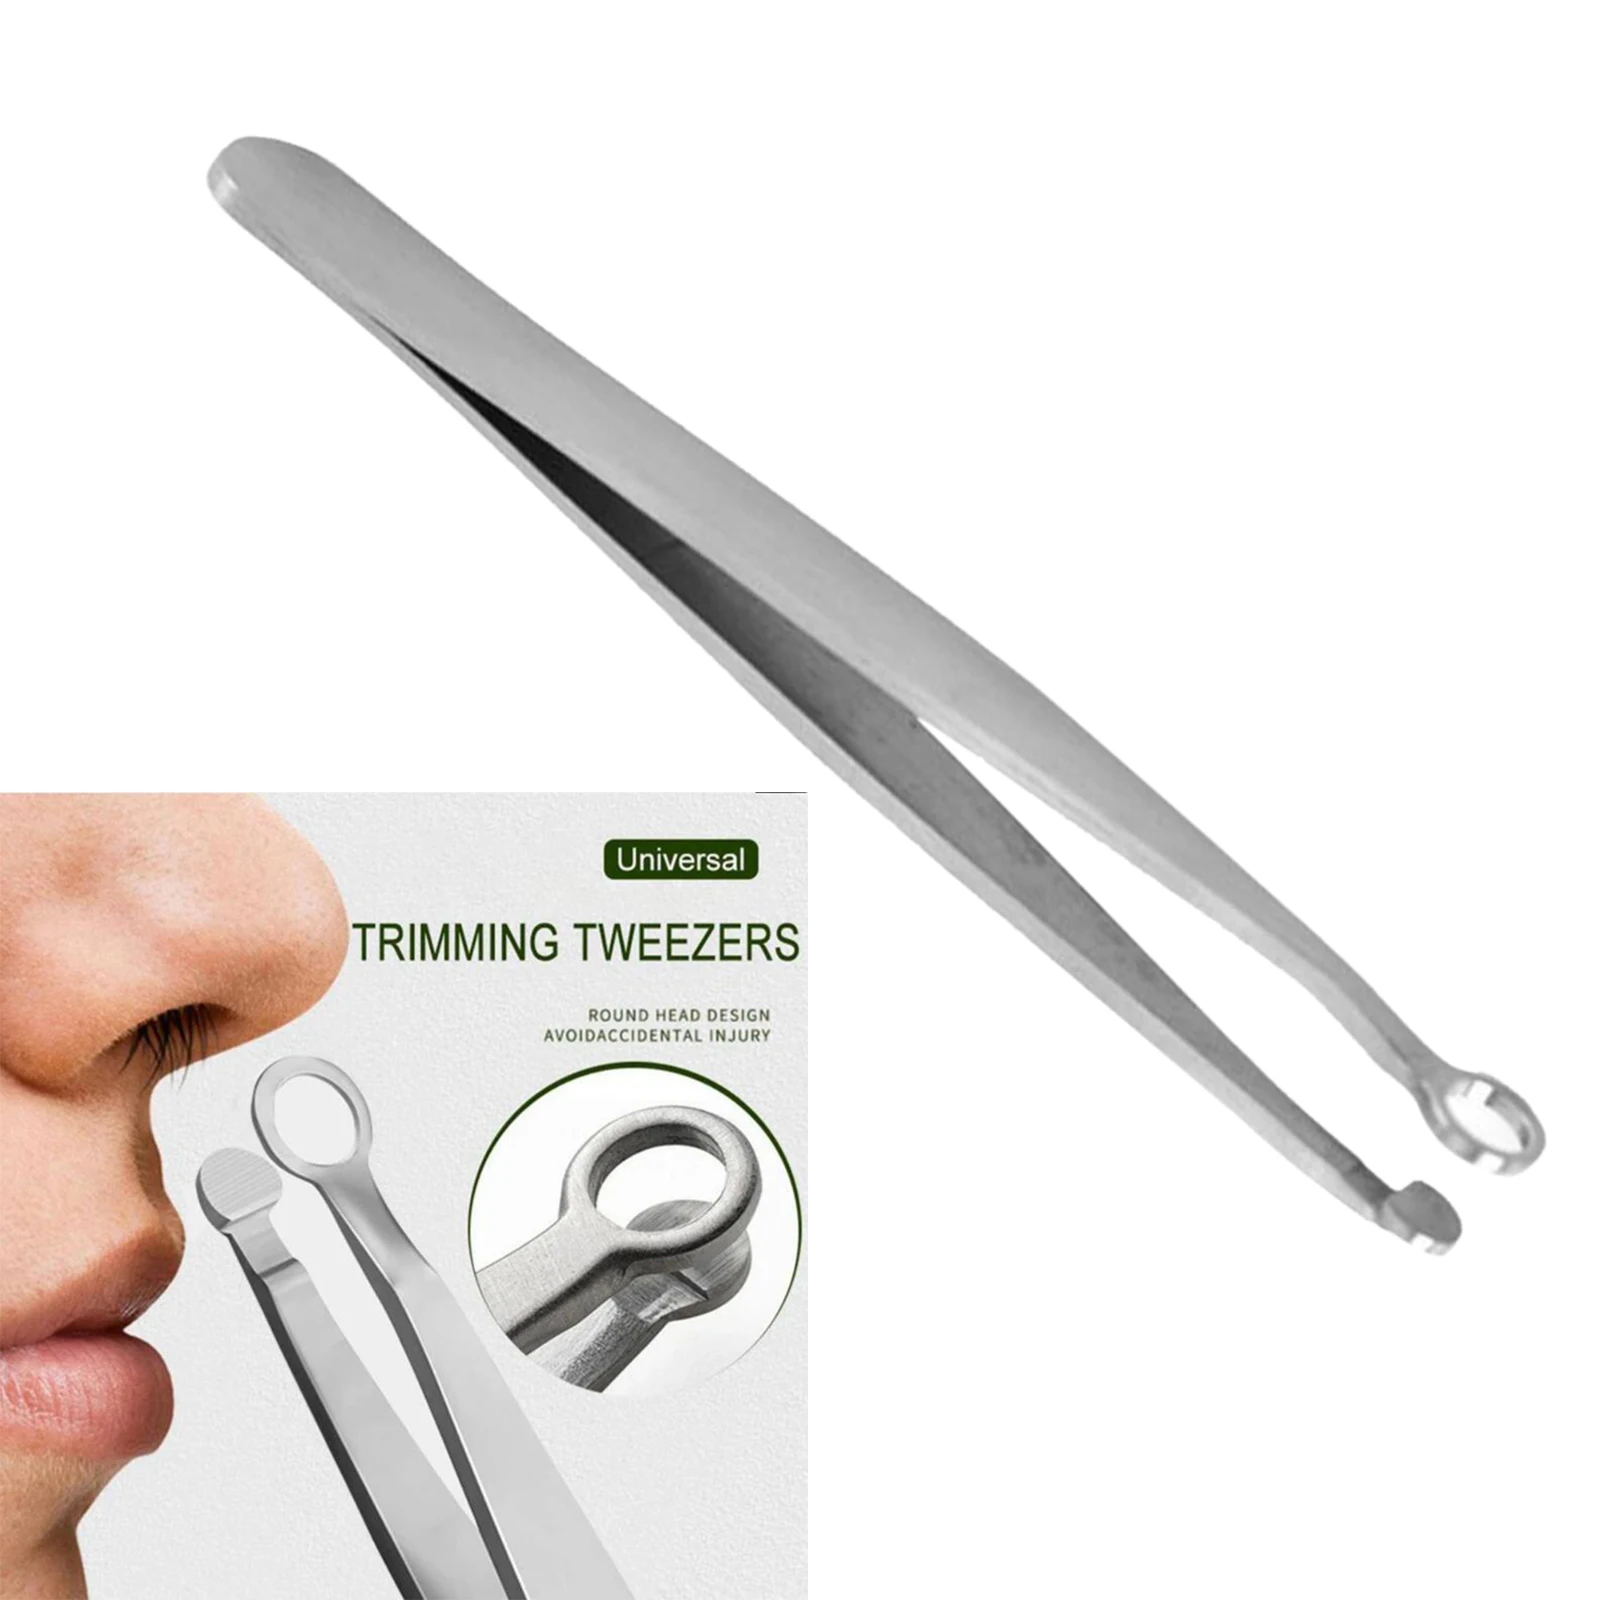 Stainless Steel Nose Hair Trimming Tweezers Safe Trimmer Round Tip Design Eyebrow Perfect Steel Nose Hair Removal Trimming